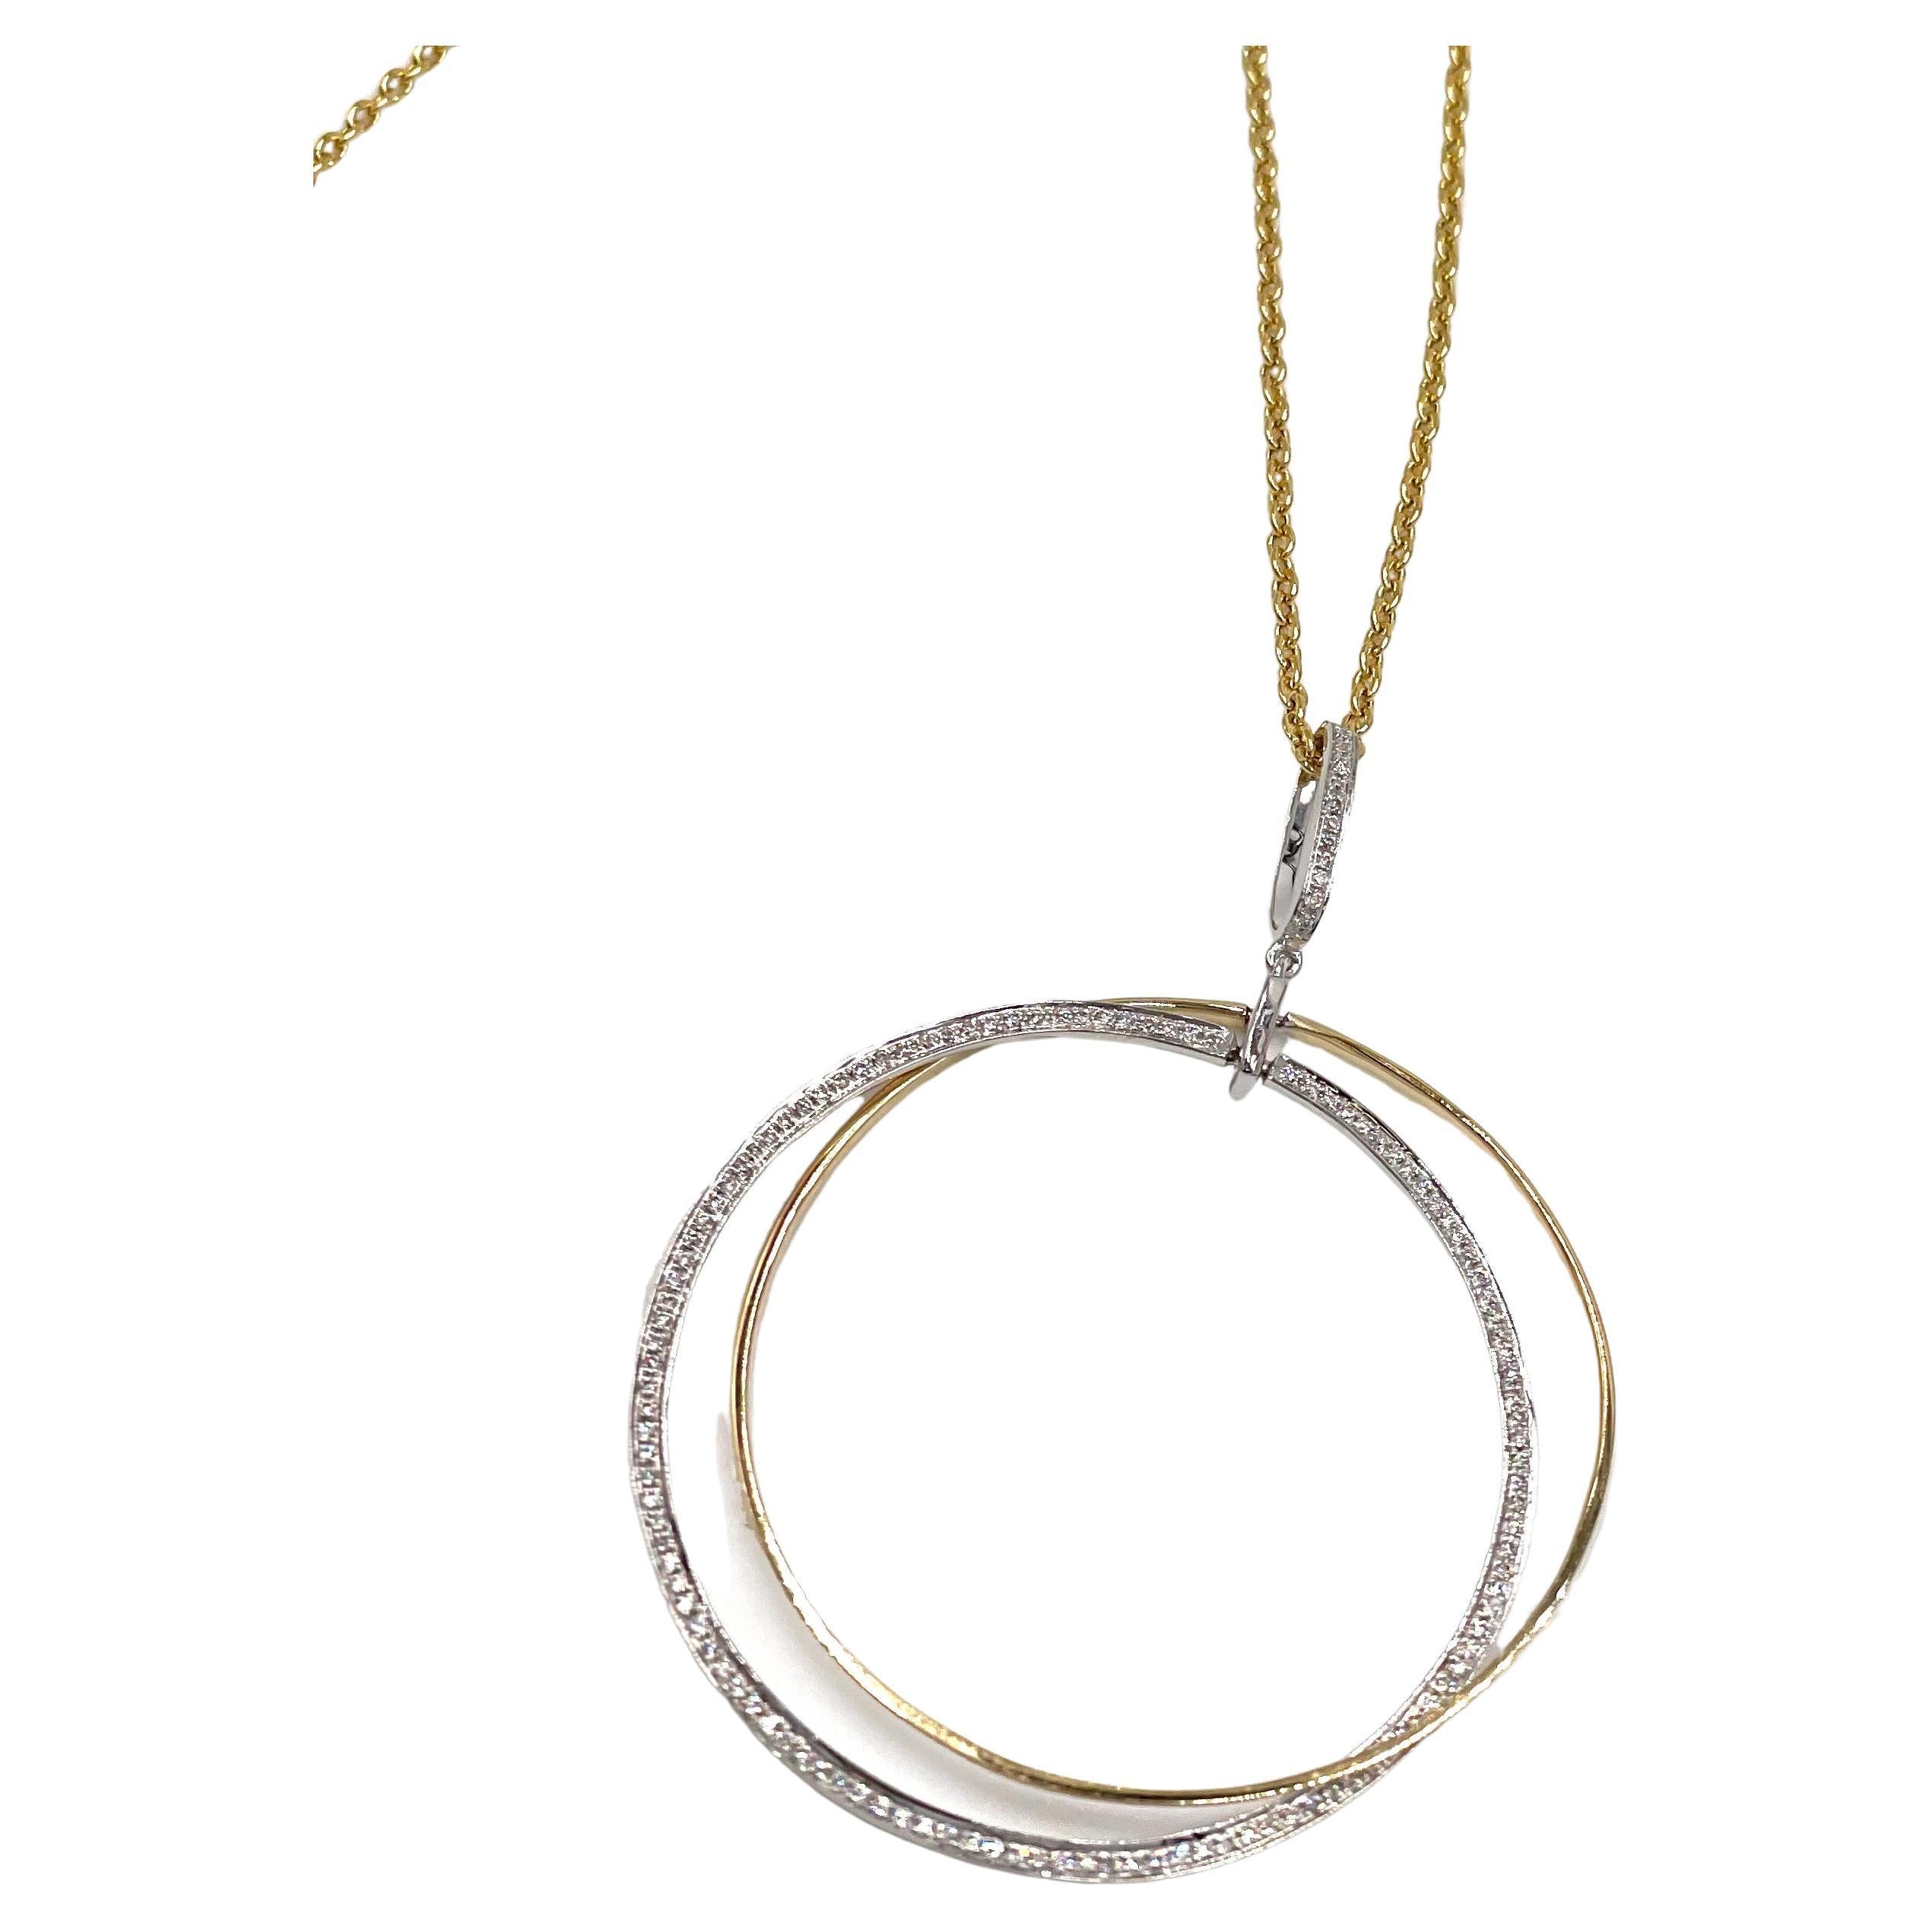 A spin on a classic circle necklace.  This 18K white and yellow gold circle pendant necklace is beautifully composed with two interlocking circles and furnished with round diamonds weighing a total of 0.37 carat.

- Diamonds are G color, VS